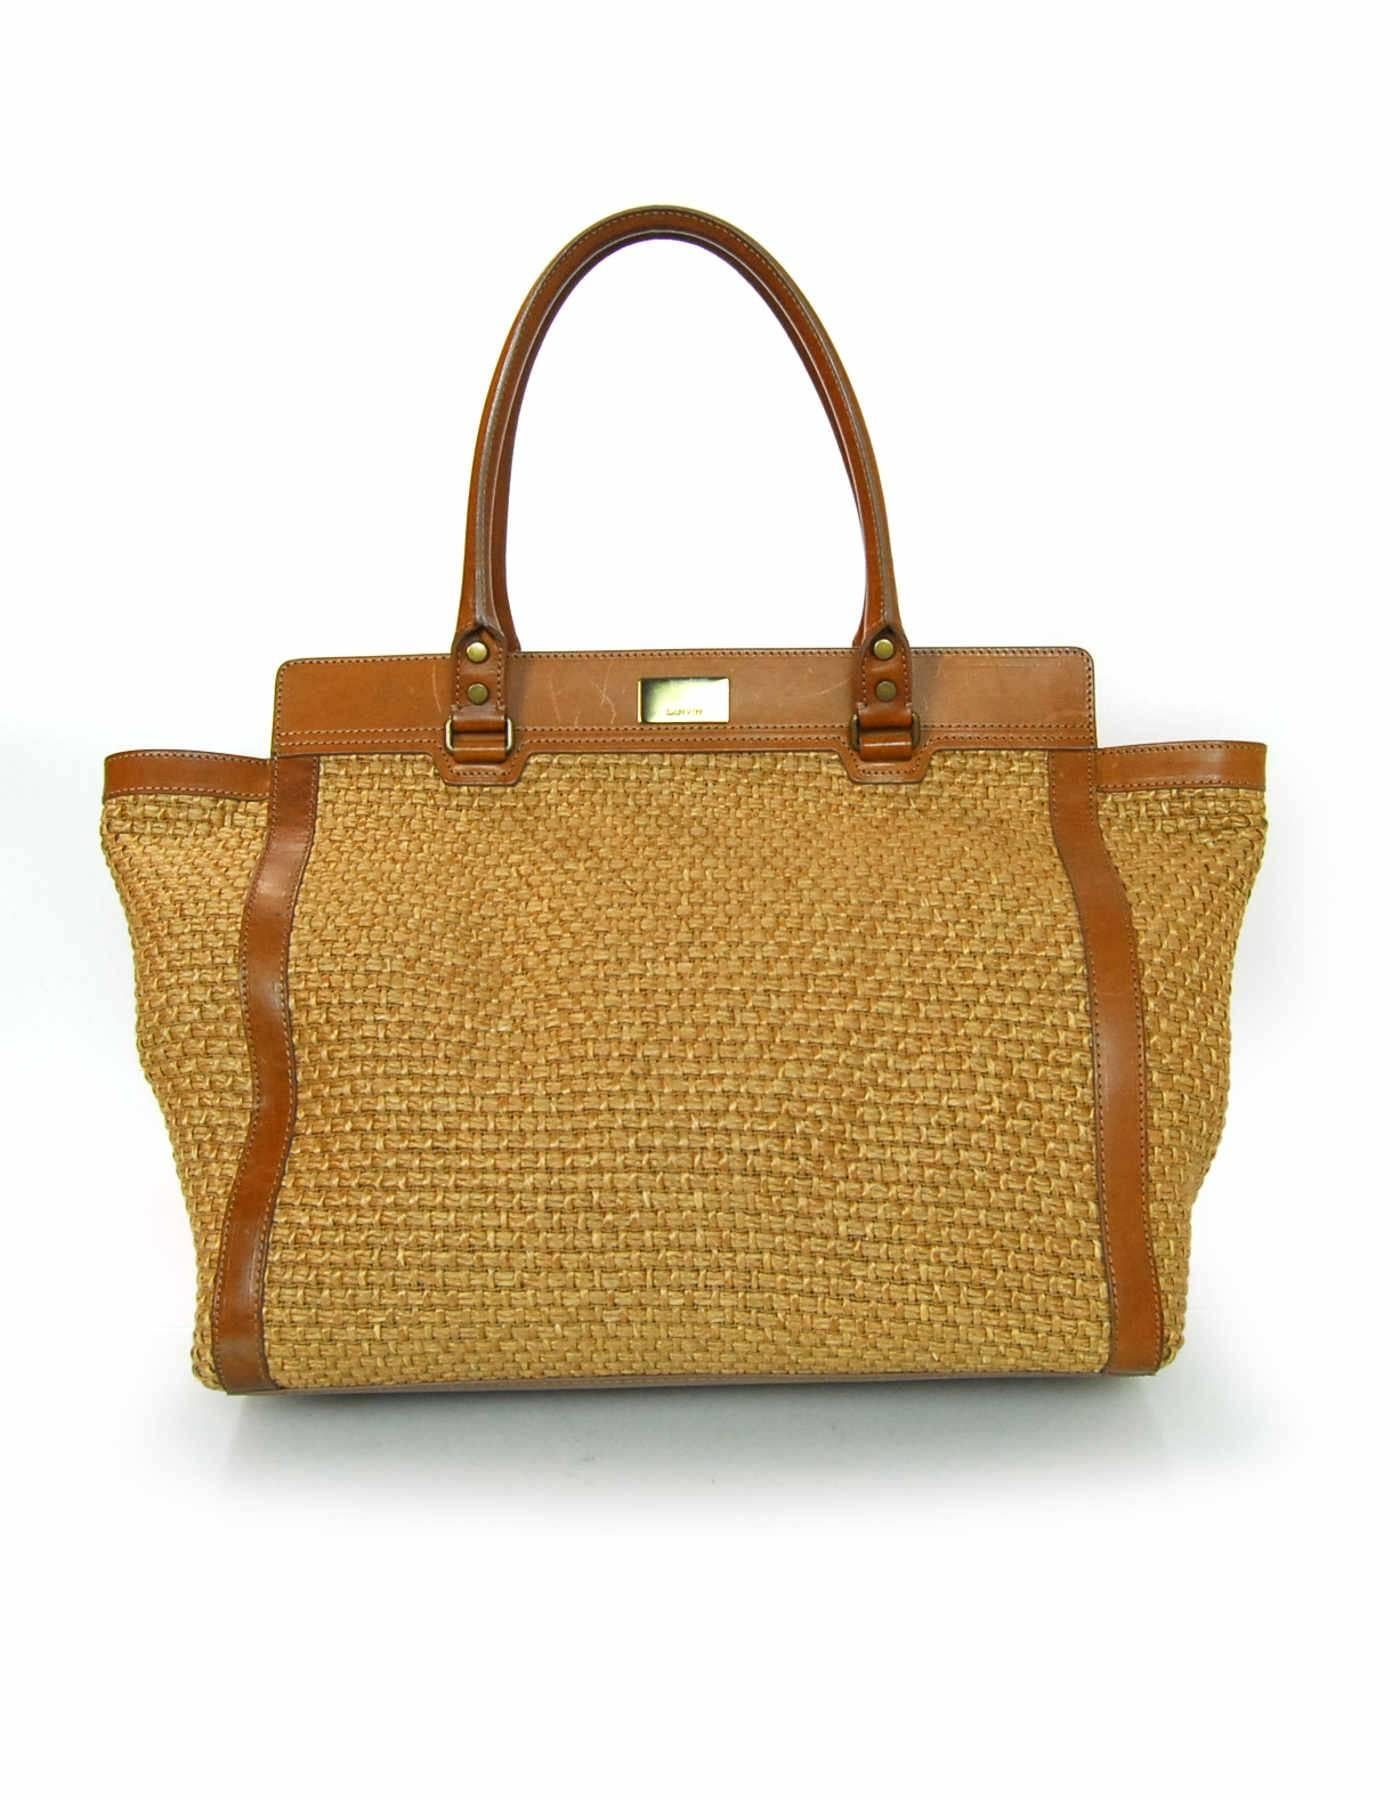 Brown Lanvin Tan Woven Tote Bag with Detachable Snakeskin Pouch 